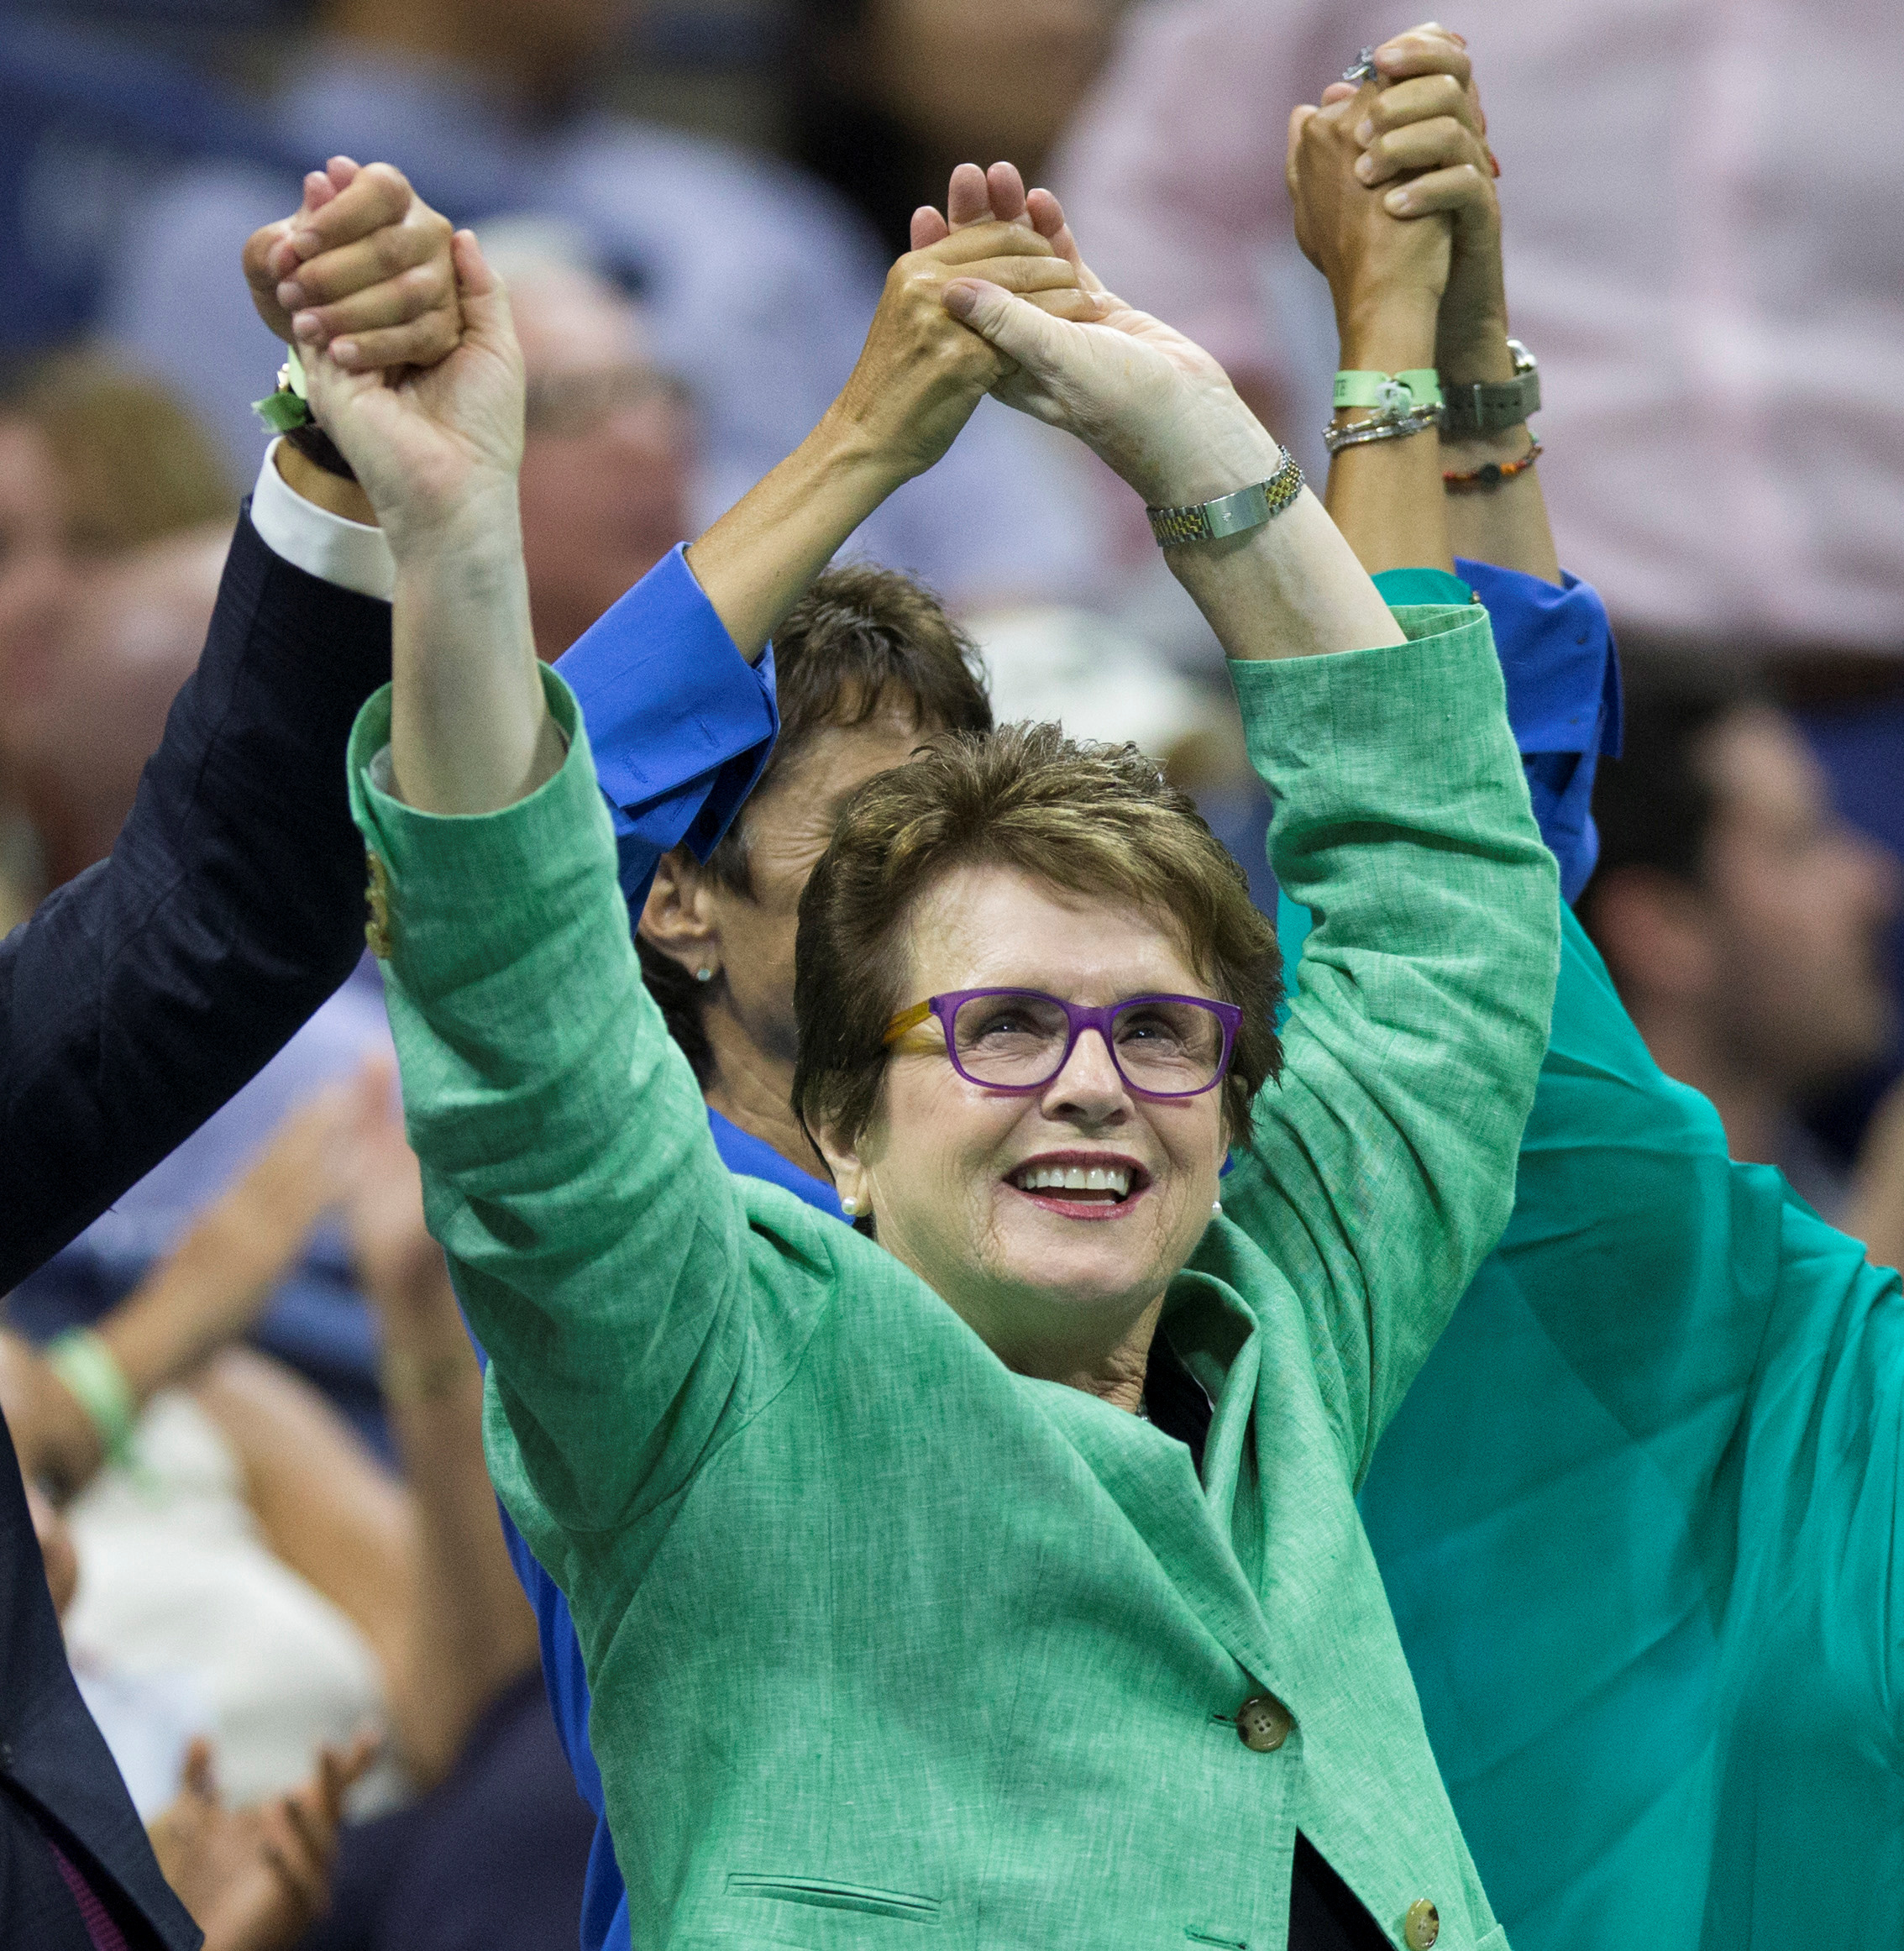 FILE PHOTO: Tennis great Billie Jean King holds hands with other attendees as Serena Williams of the U.S. faces her sister and compatriot Venus Williams in their quarterfinals match at the U.S. Open Championships tennis tournament in New York